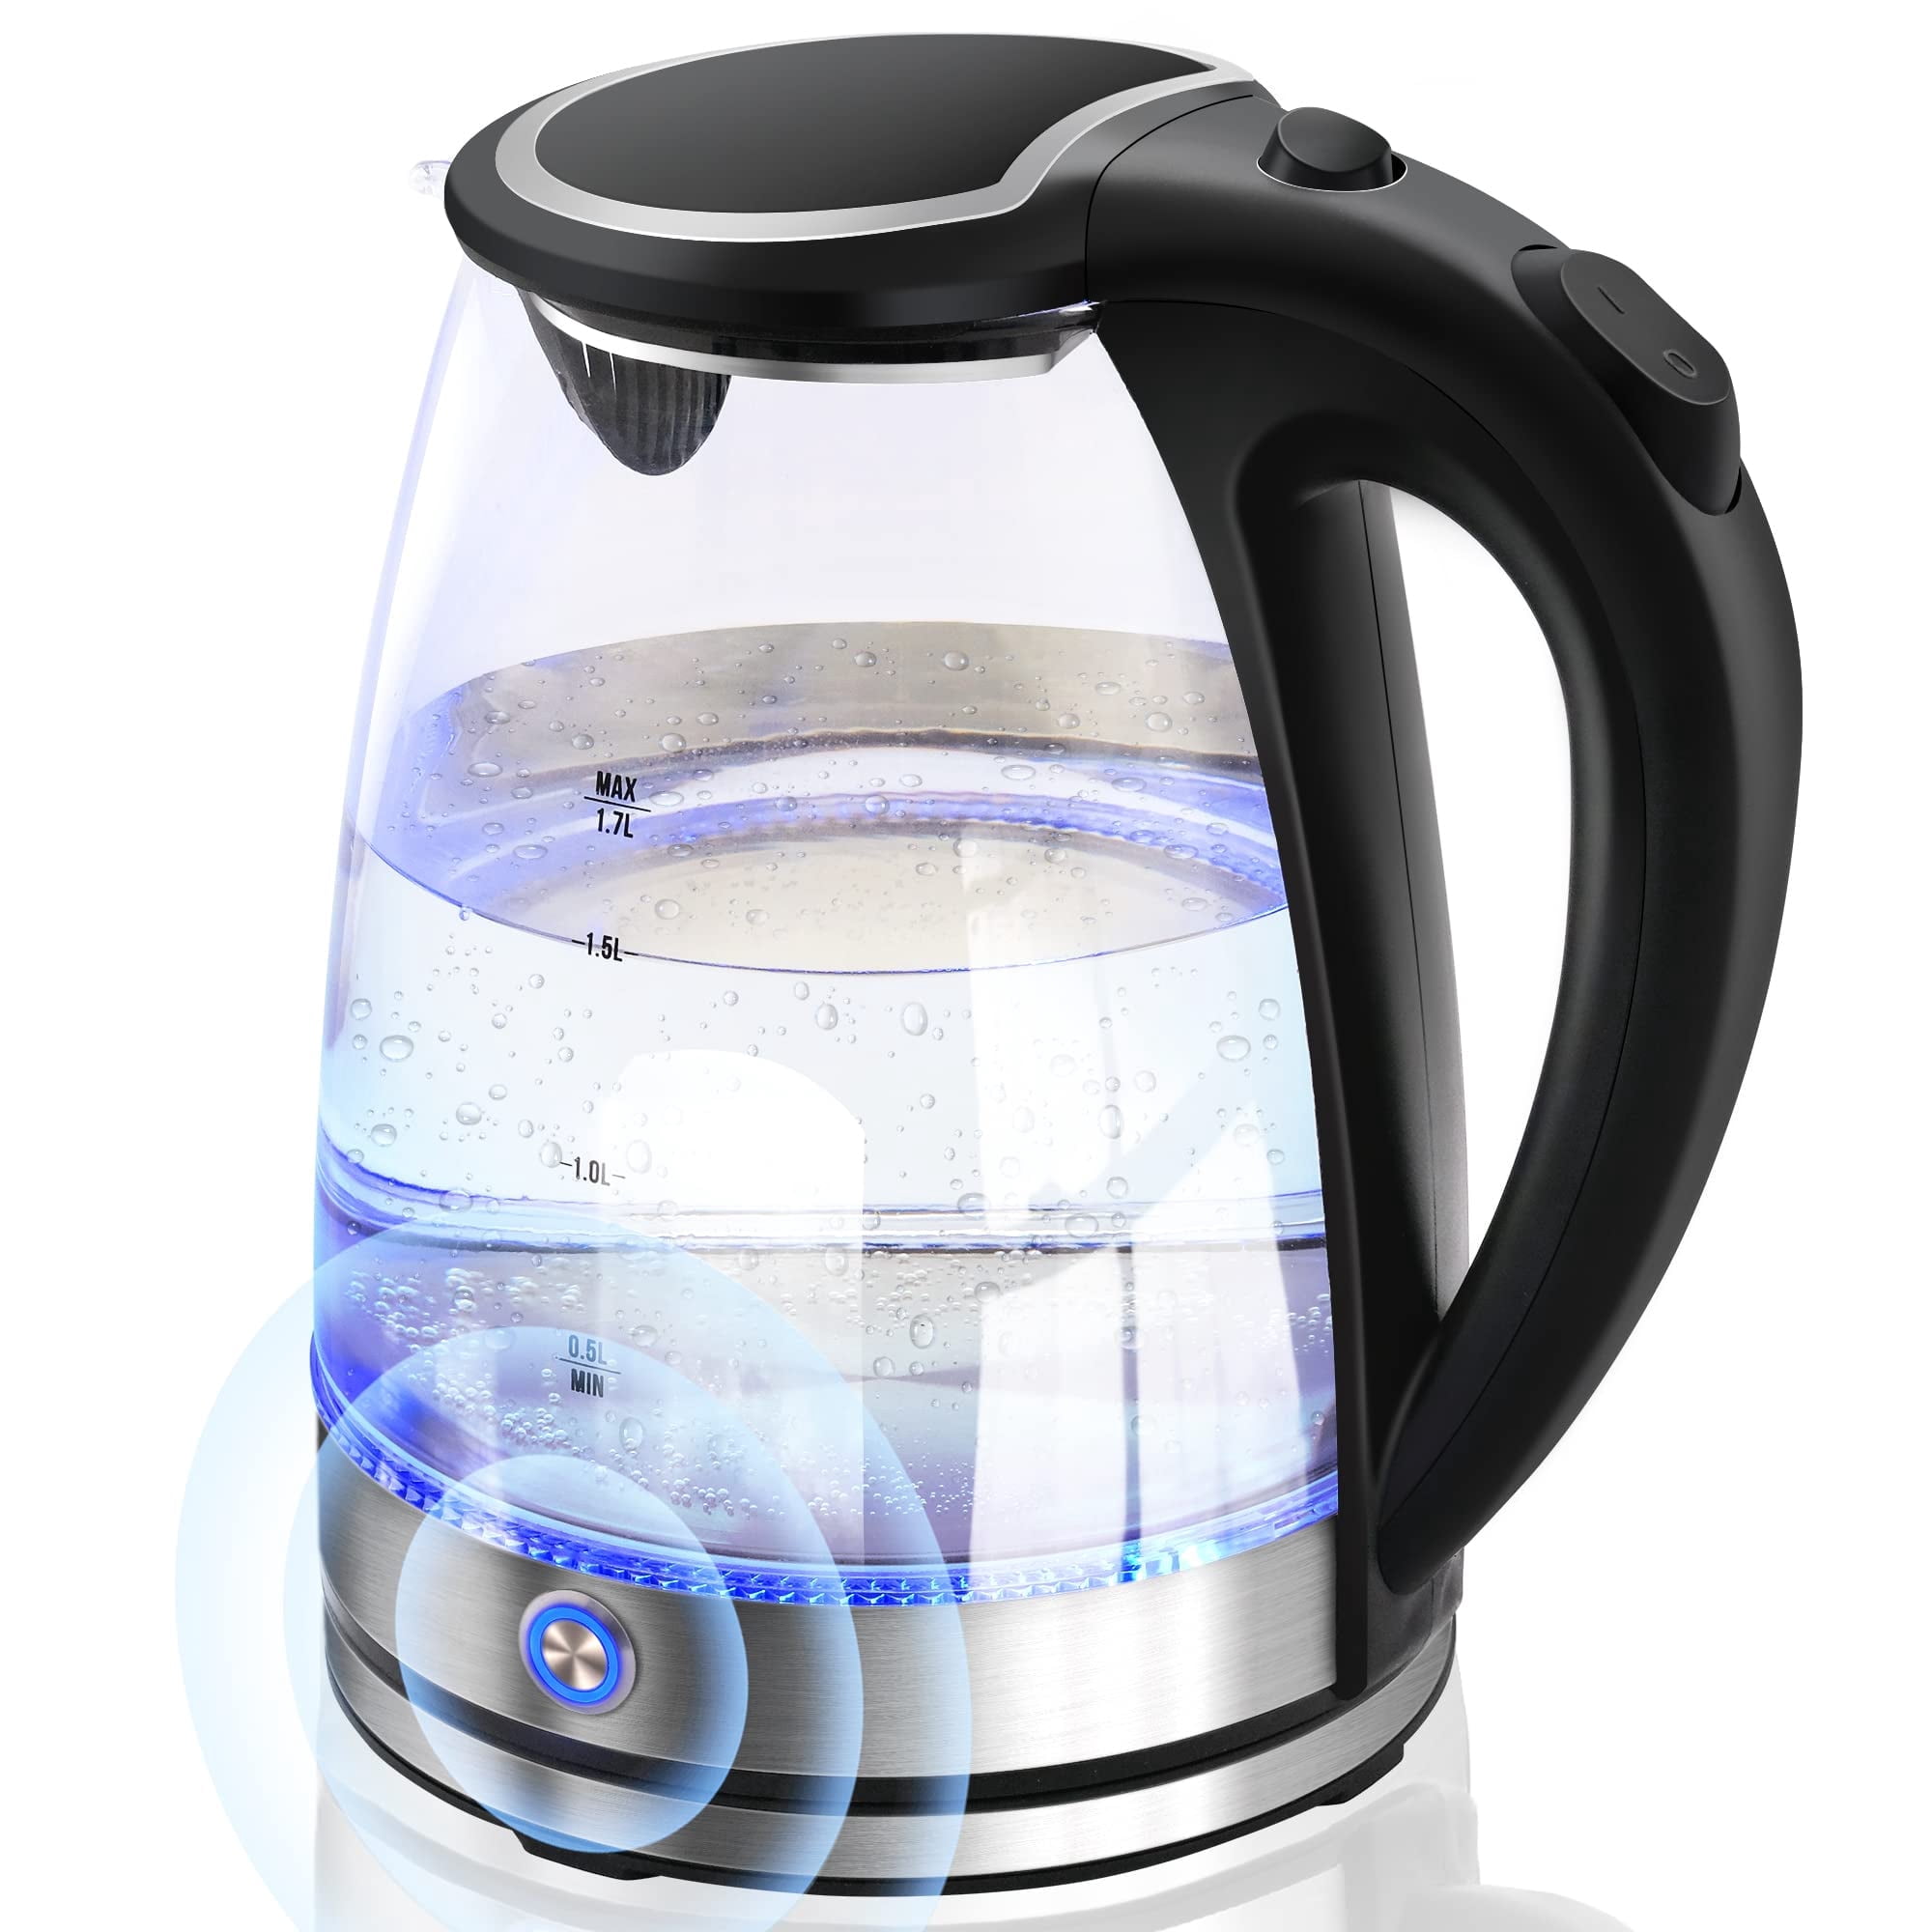 Comfee' Glass Electric Tea Kettle & Hot Water BoilerBPA-Free, 1.7L, Cordless LED